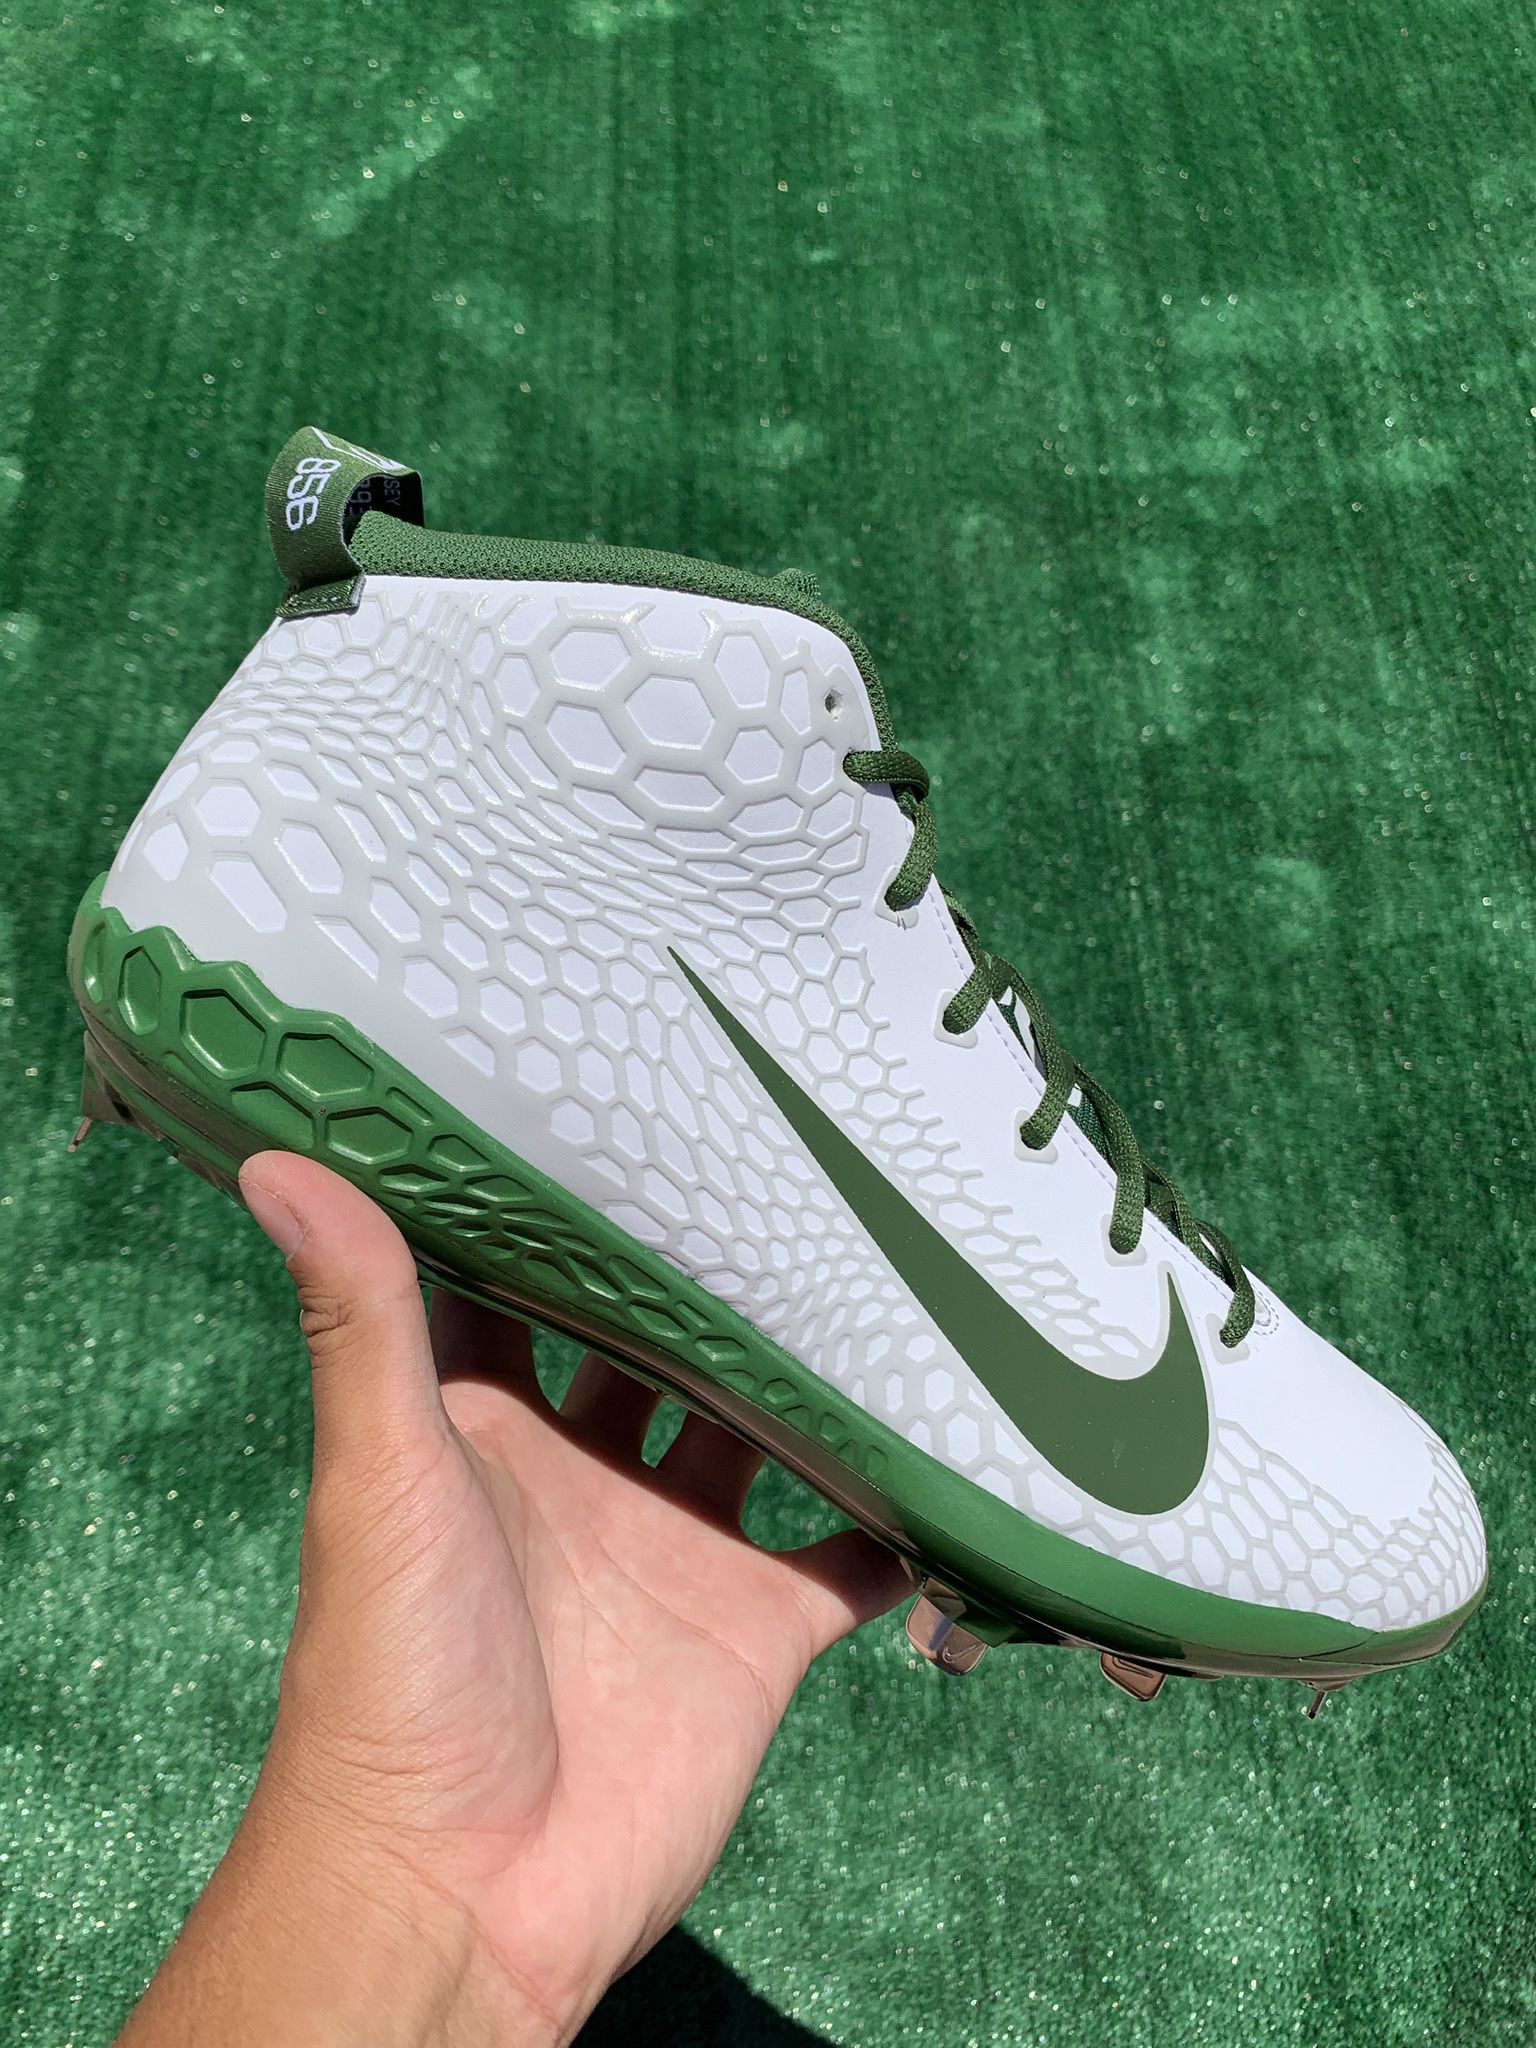 NIKE FORCE ZOOM TROUT 5 PRO “WHITE / FOREST GREEN” METAL BASEBALL CLEATS (Size 12, Men’s)